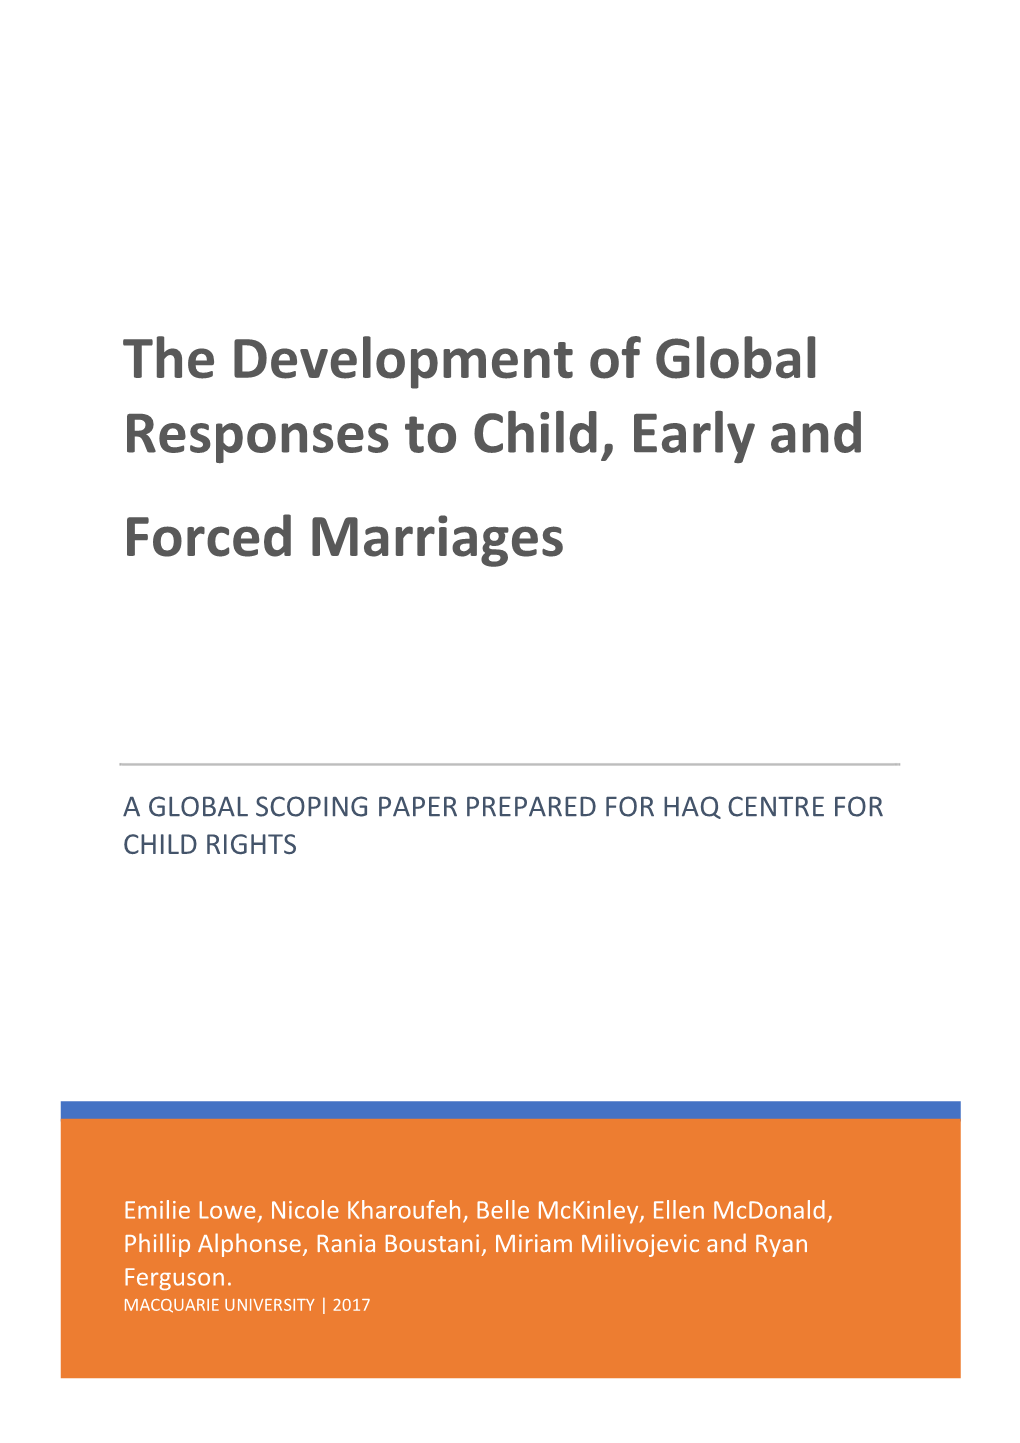 The Development of Global Responses to Child, Early and Forced Marriages